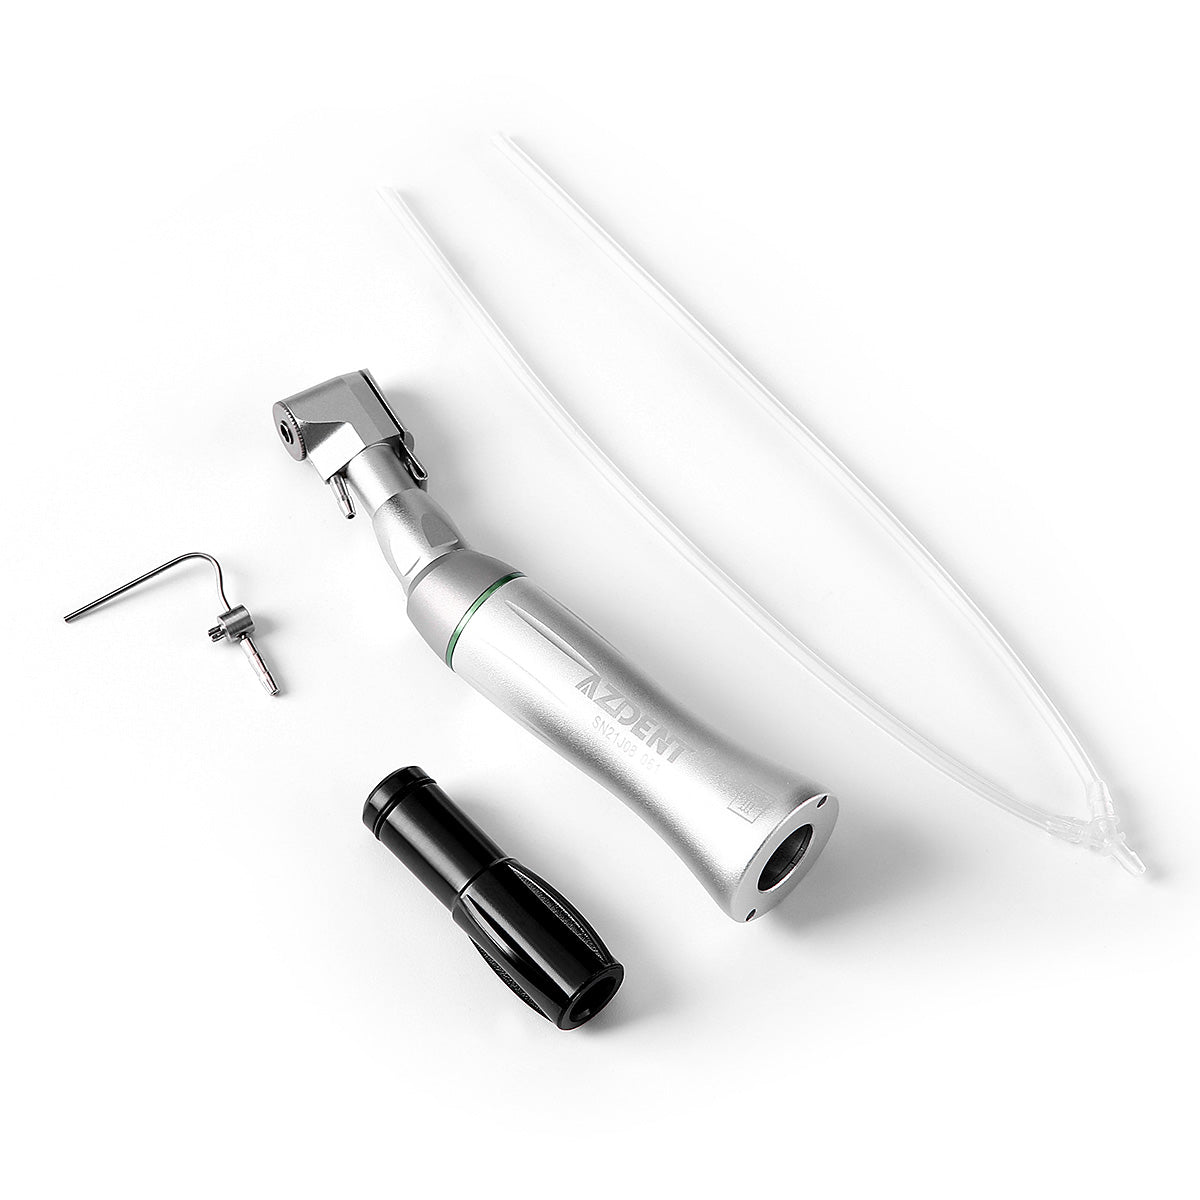 20:1 Reduction Implant Latch Contra Angle Handpiece Water Spray - pairaydental.com